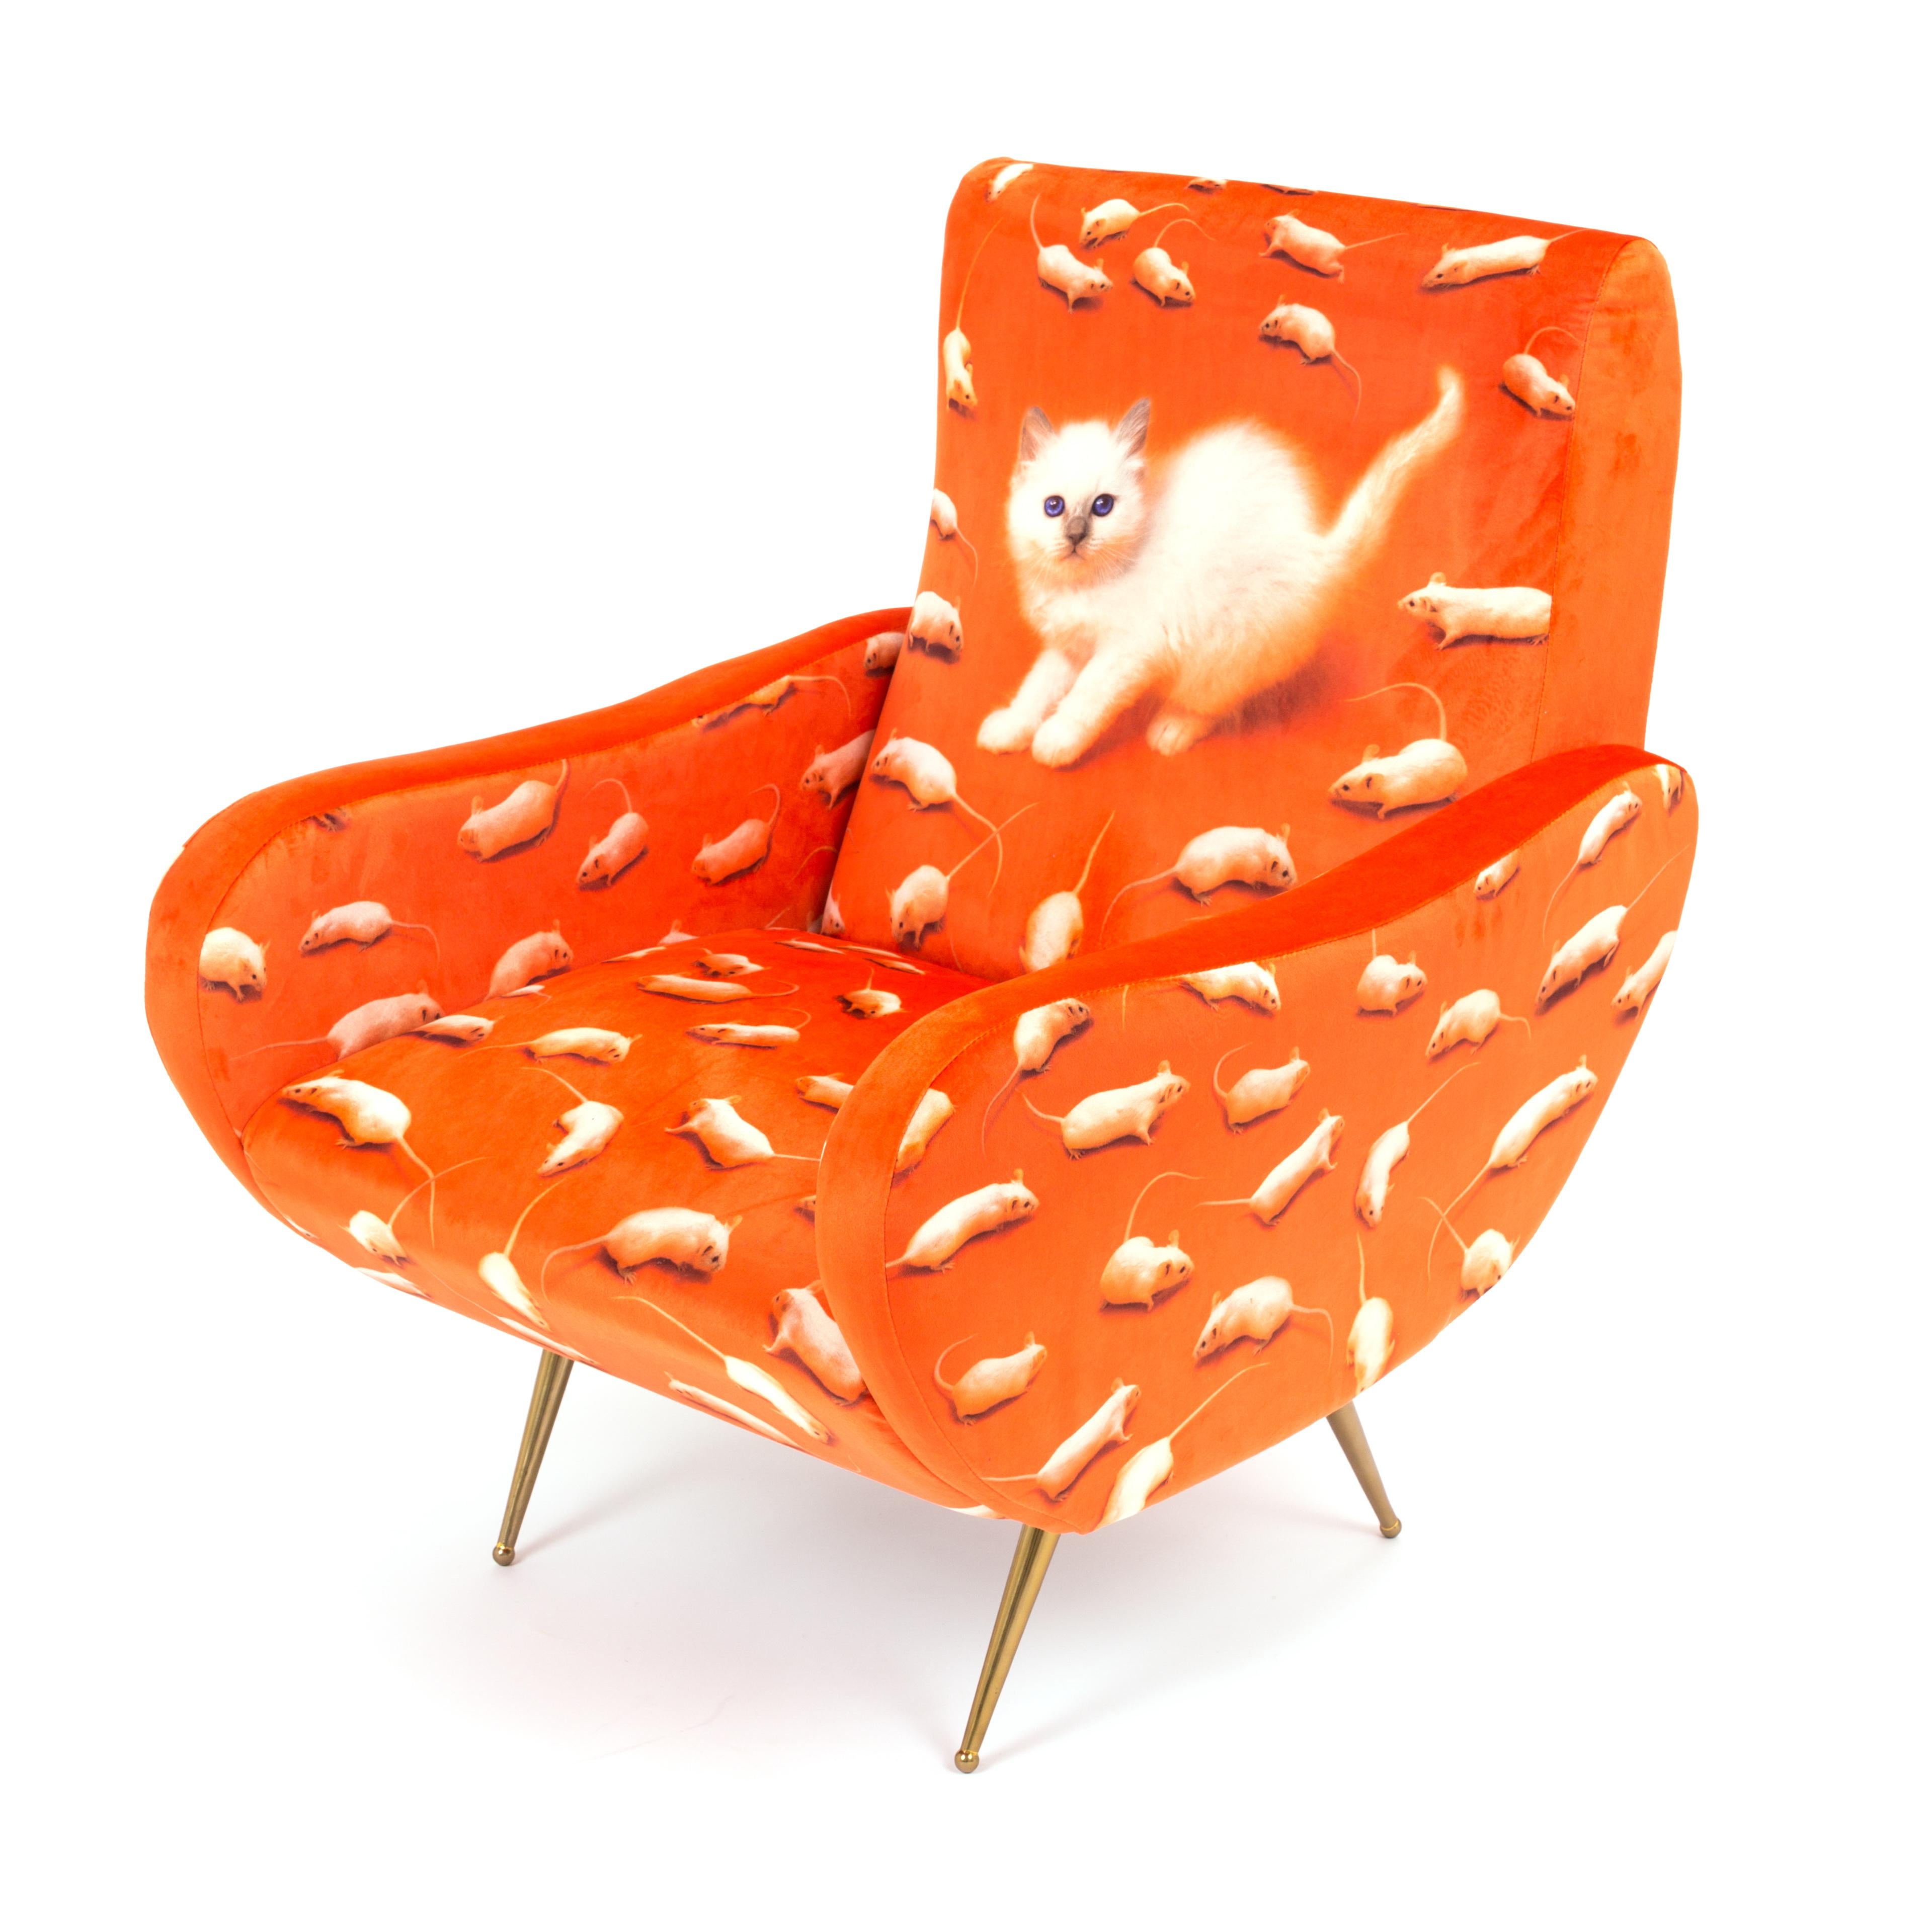 The traditional design of these 1950s style seats are upholstered with unexpected surreal images. The images of the Toiletpaper magazine invade furniture and become comfortable objects to relax in – not only for art lovers’ homes.

- Material: